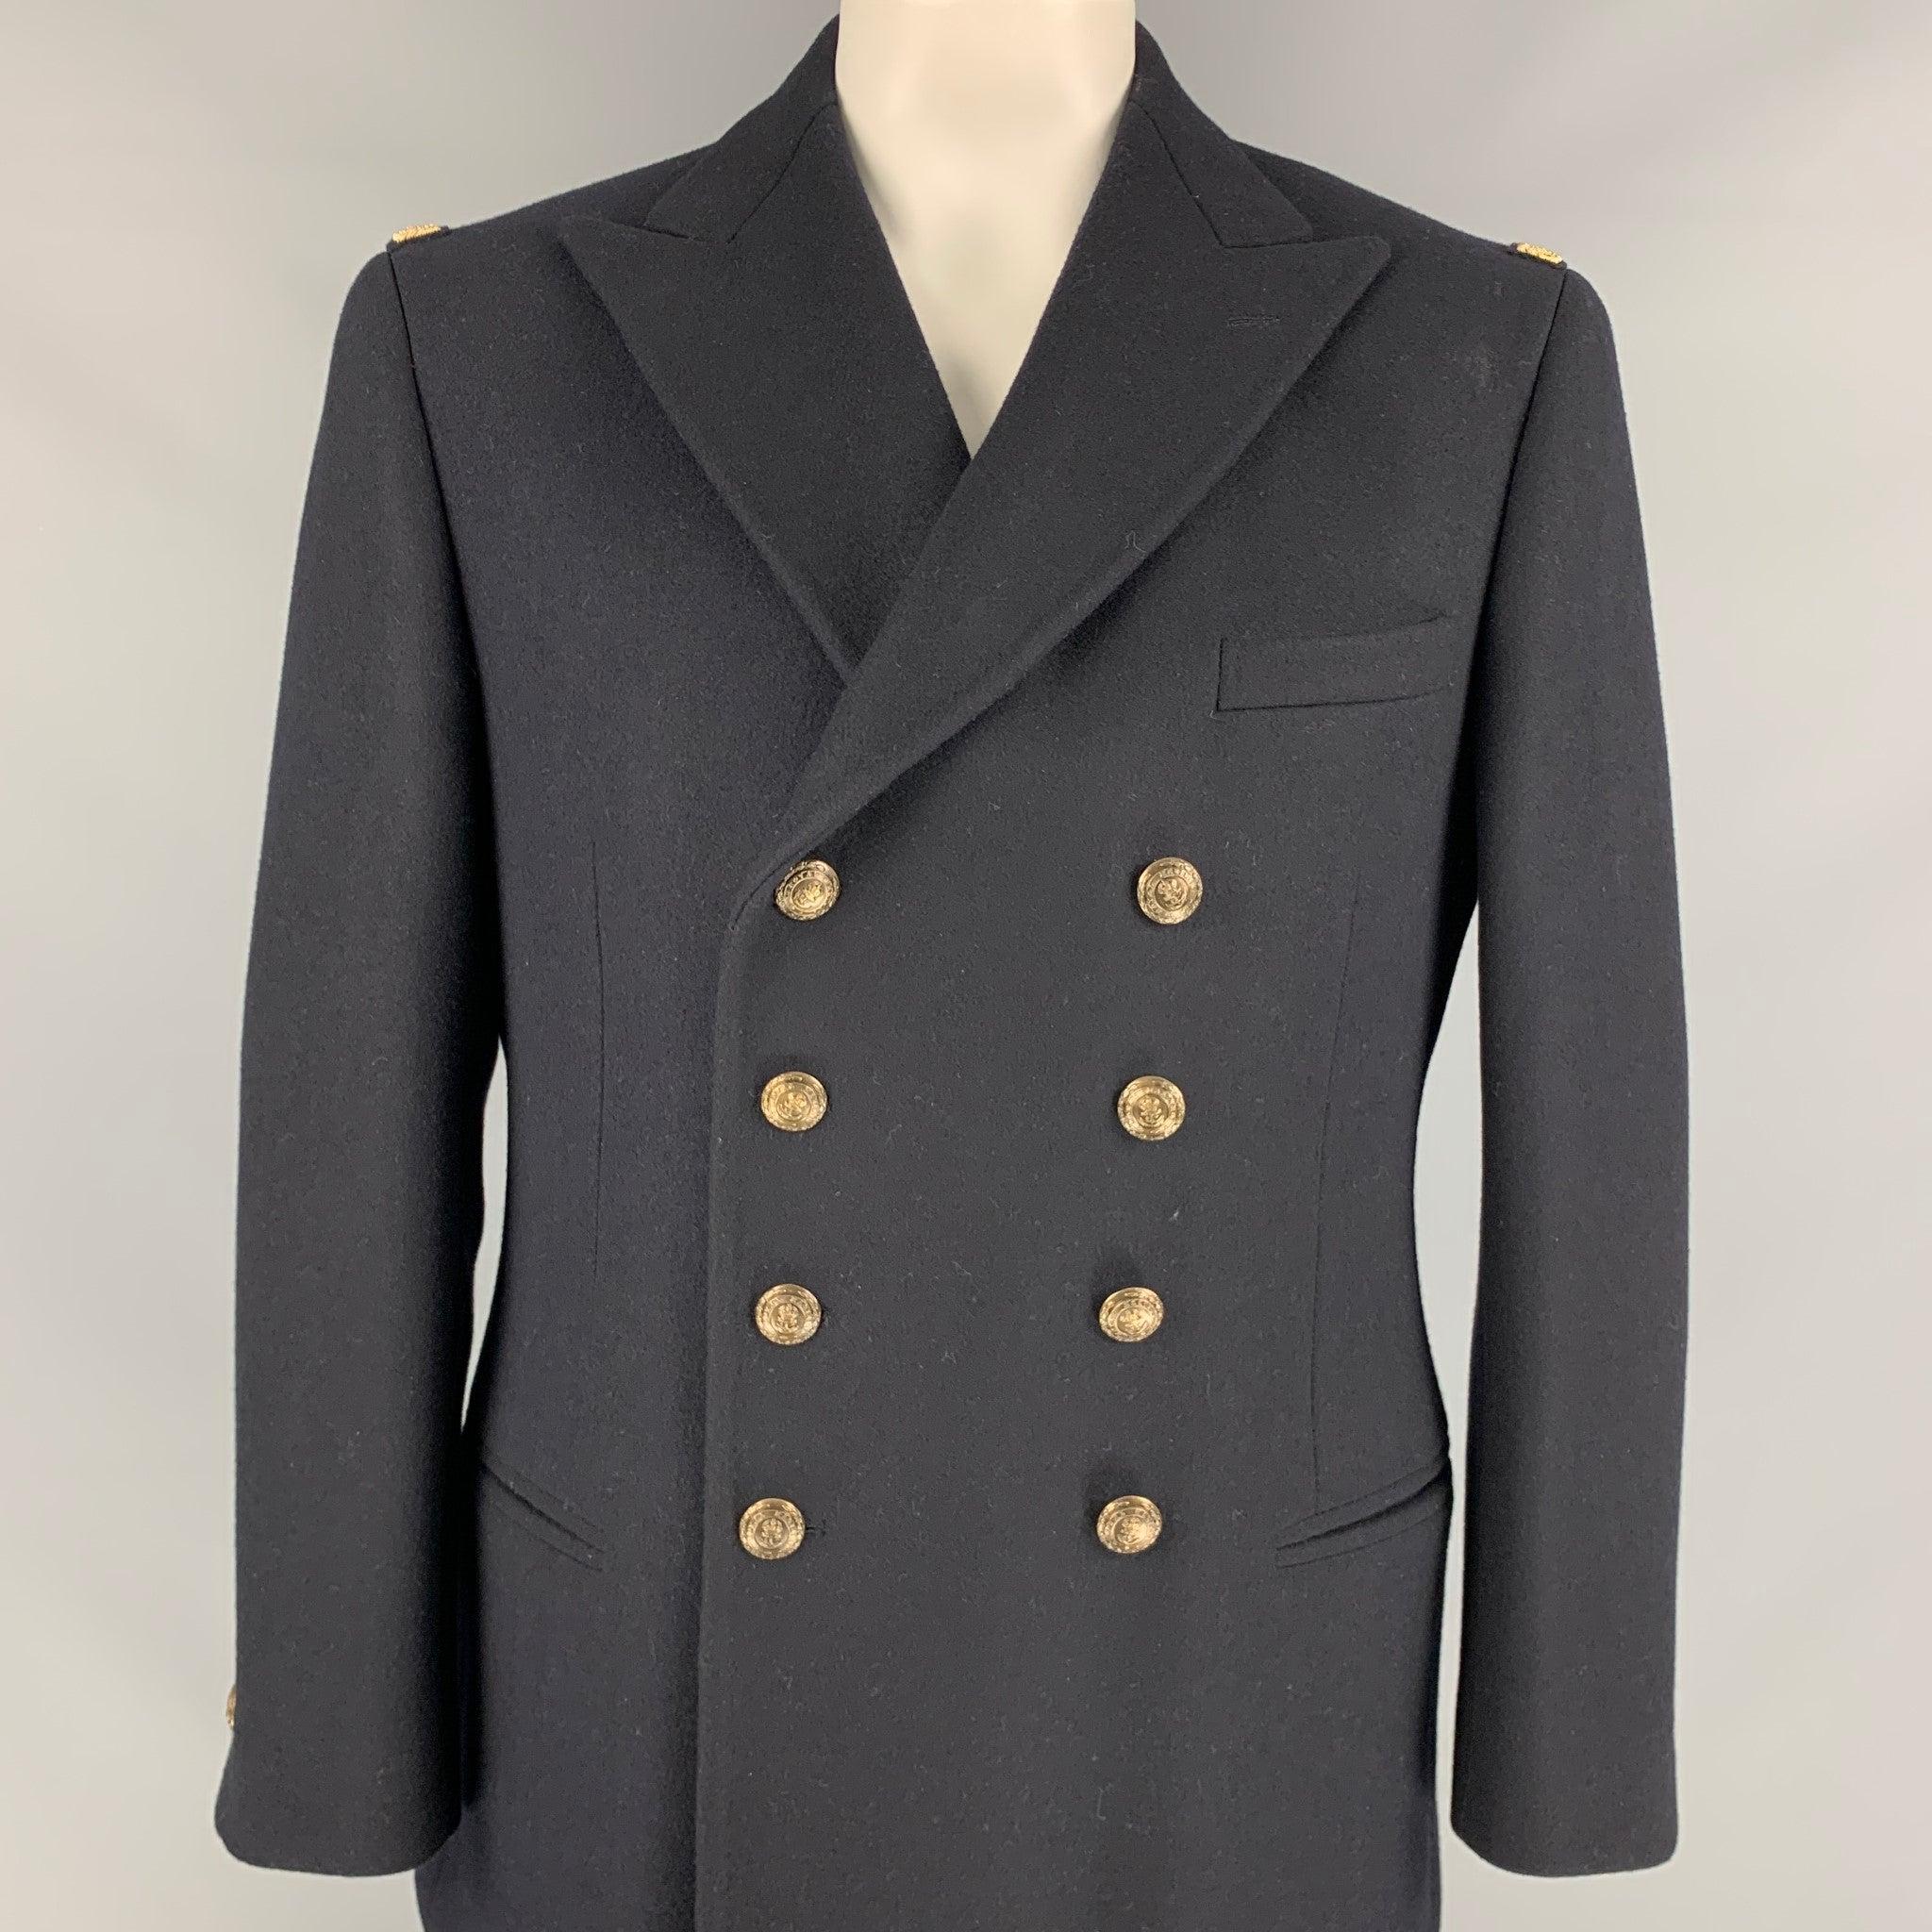 RALPH LAUREN PURPLE LABEL coat comes in a black wool / cashmere with a full liner featuring gold stitching details, peak lapel, slit pockets, and a double breasted closure.
Very Good
Pre-Owned Condition. 

Marked:  42 

Measurements: 
